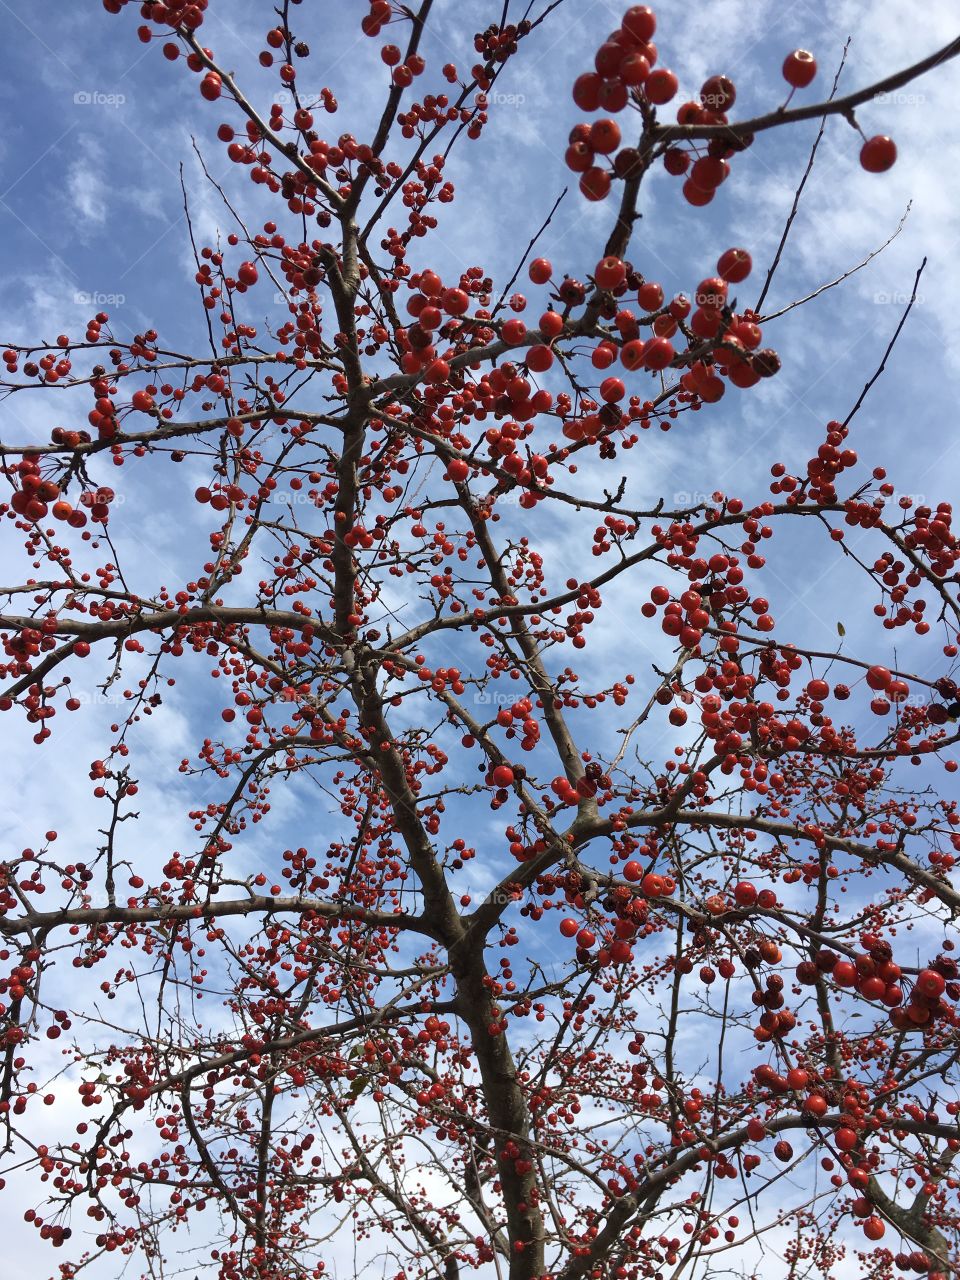 looking up at red berries that contrast the cloudy blue sky